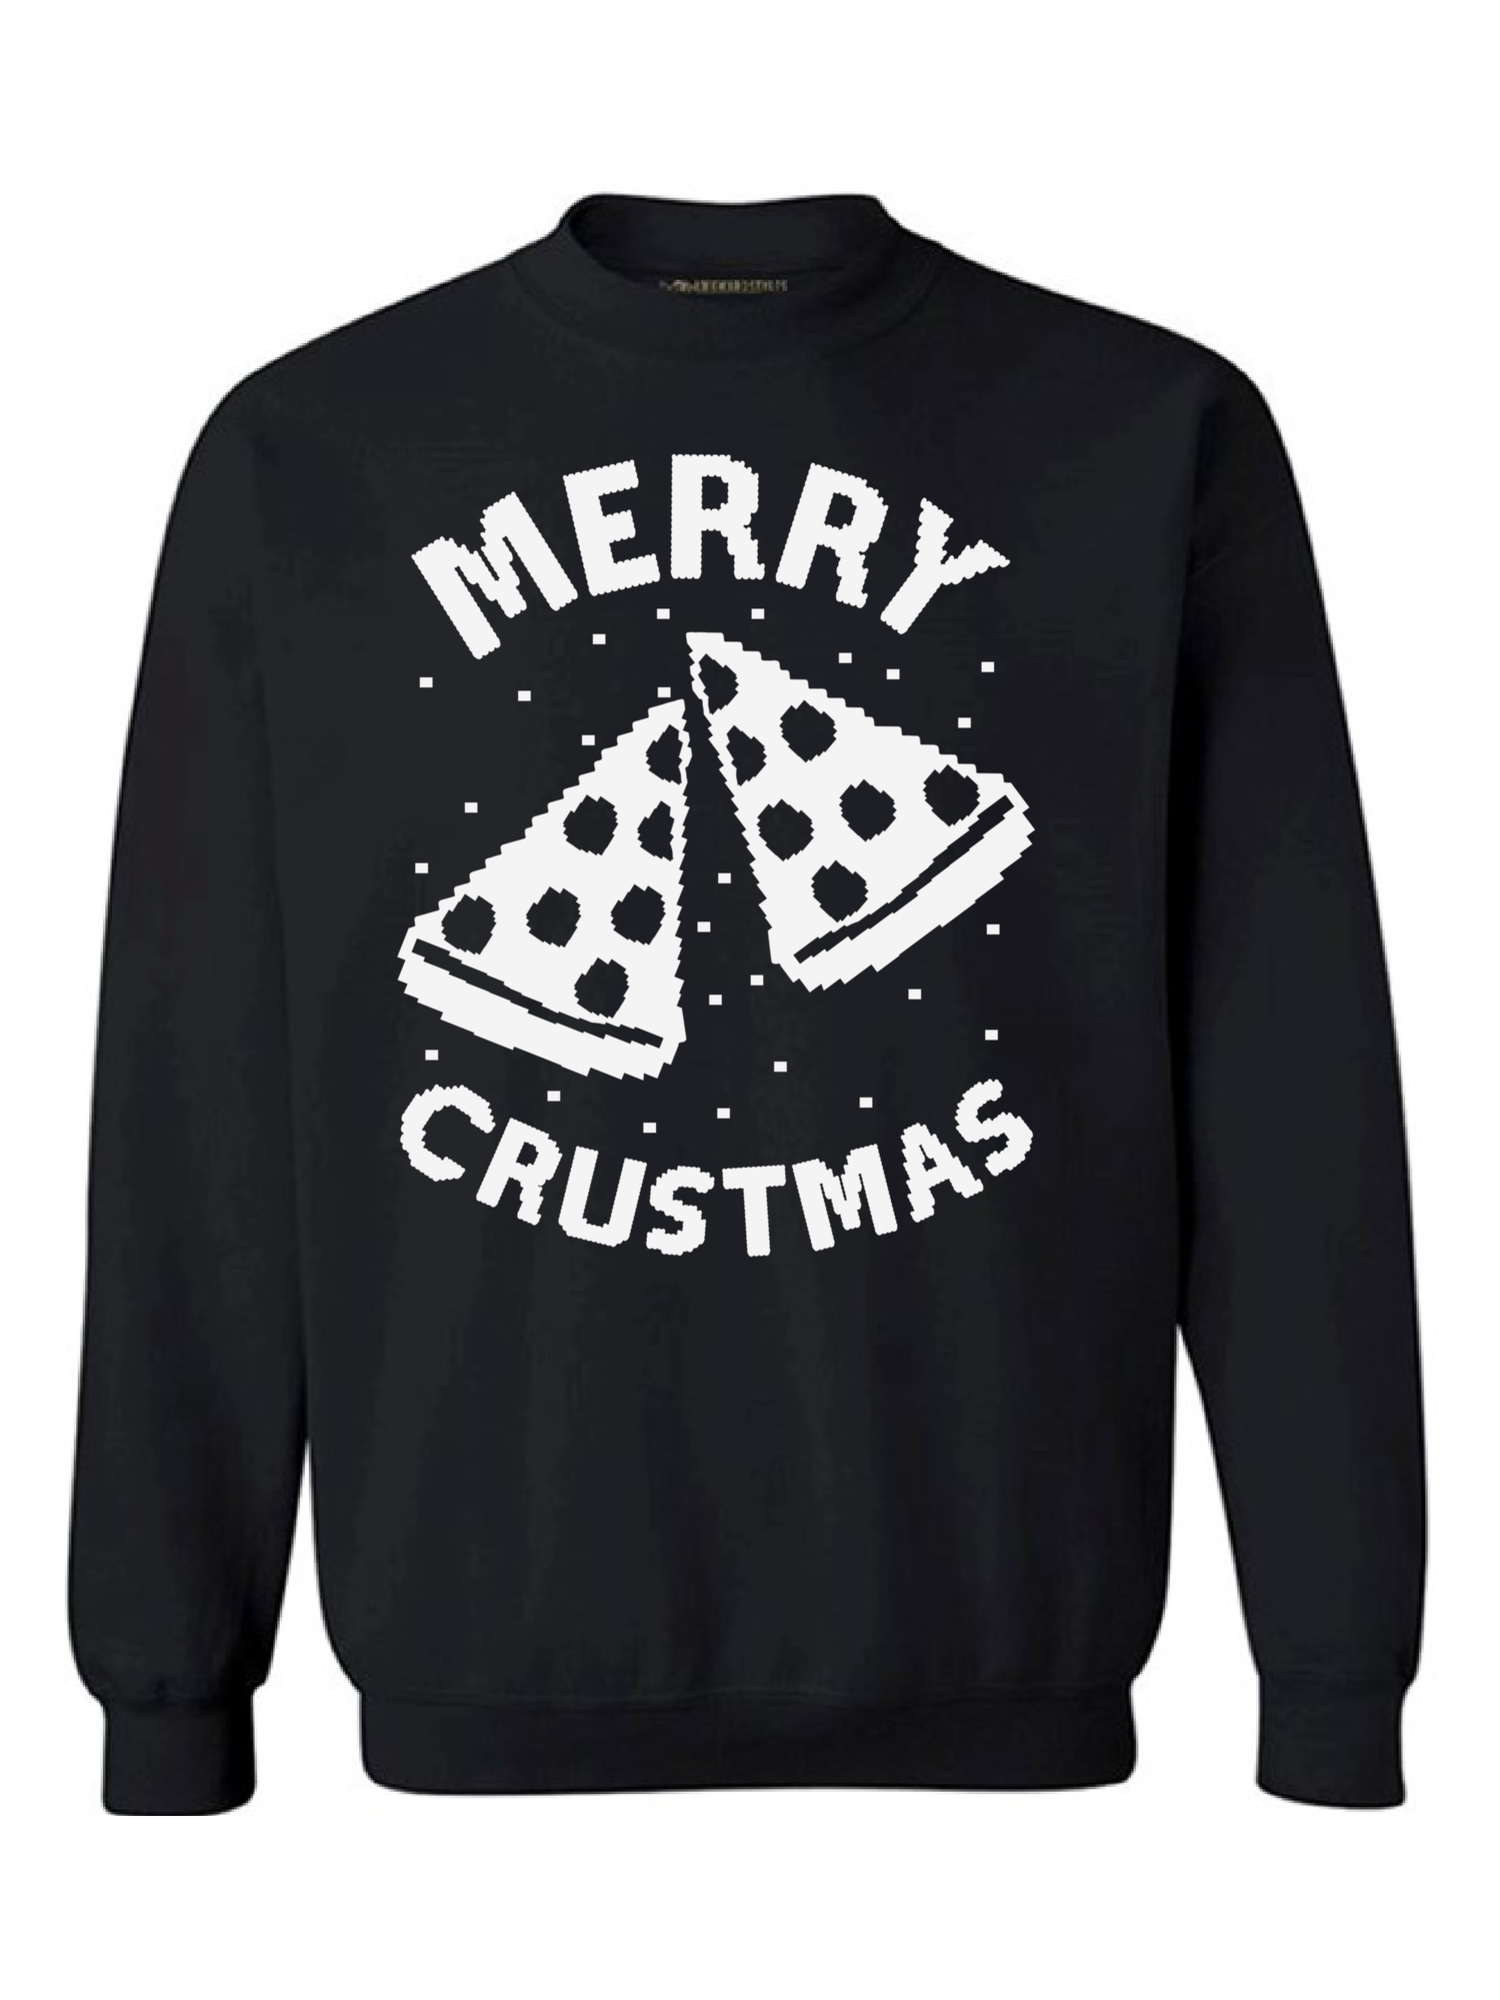 Awkward Styles Merry Crustmas Christmas Sweatshirt Pizza Christmas Funny Sweater Xmas Party Merry Christmas Holiday Sweatshirt Christmas Sweatshirt for Men Women Holidays Gift Idea For Pizza Lovers - image 1 of 5